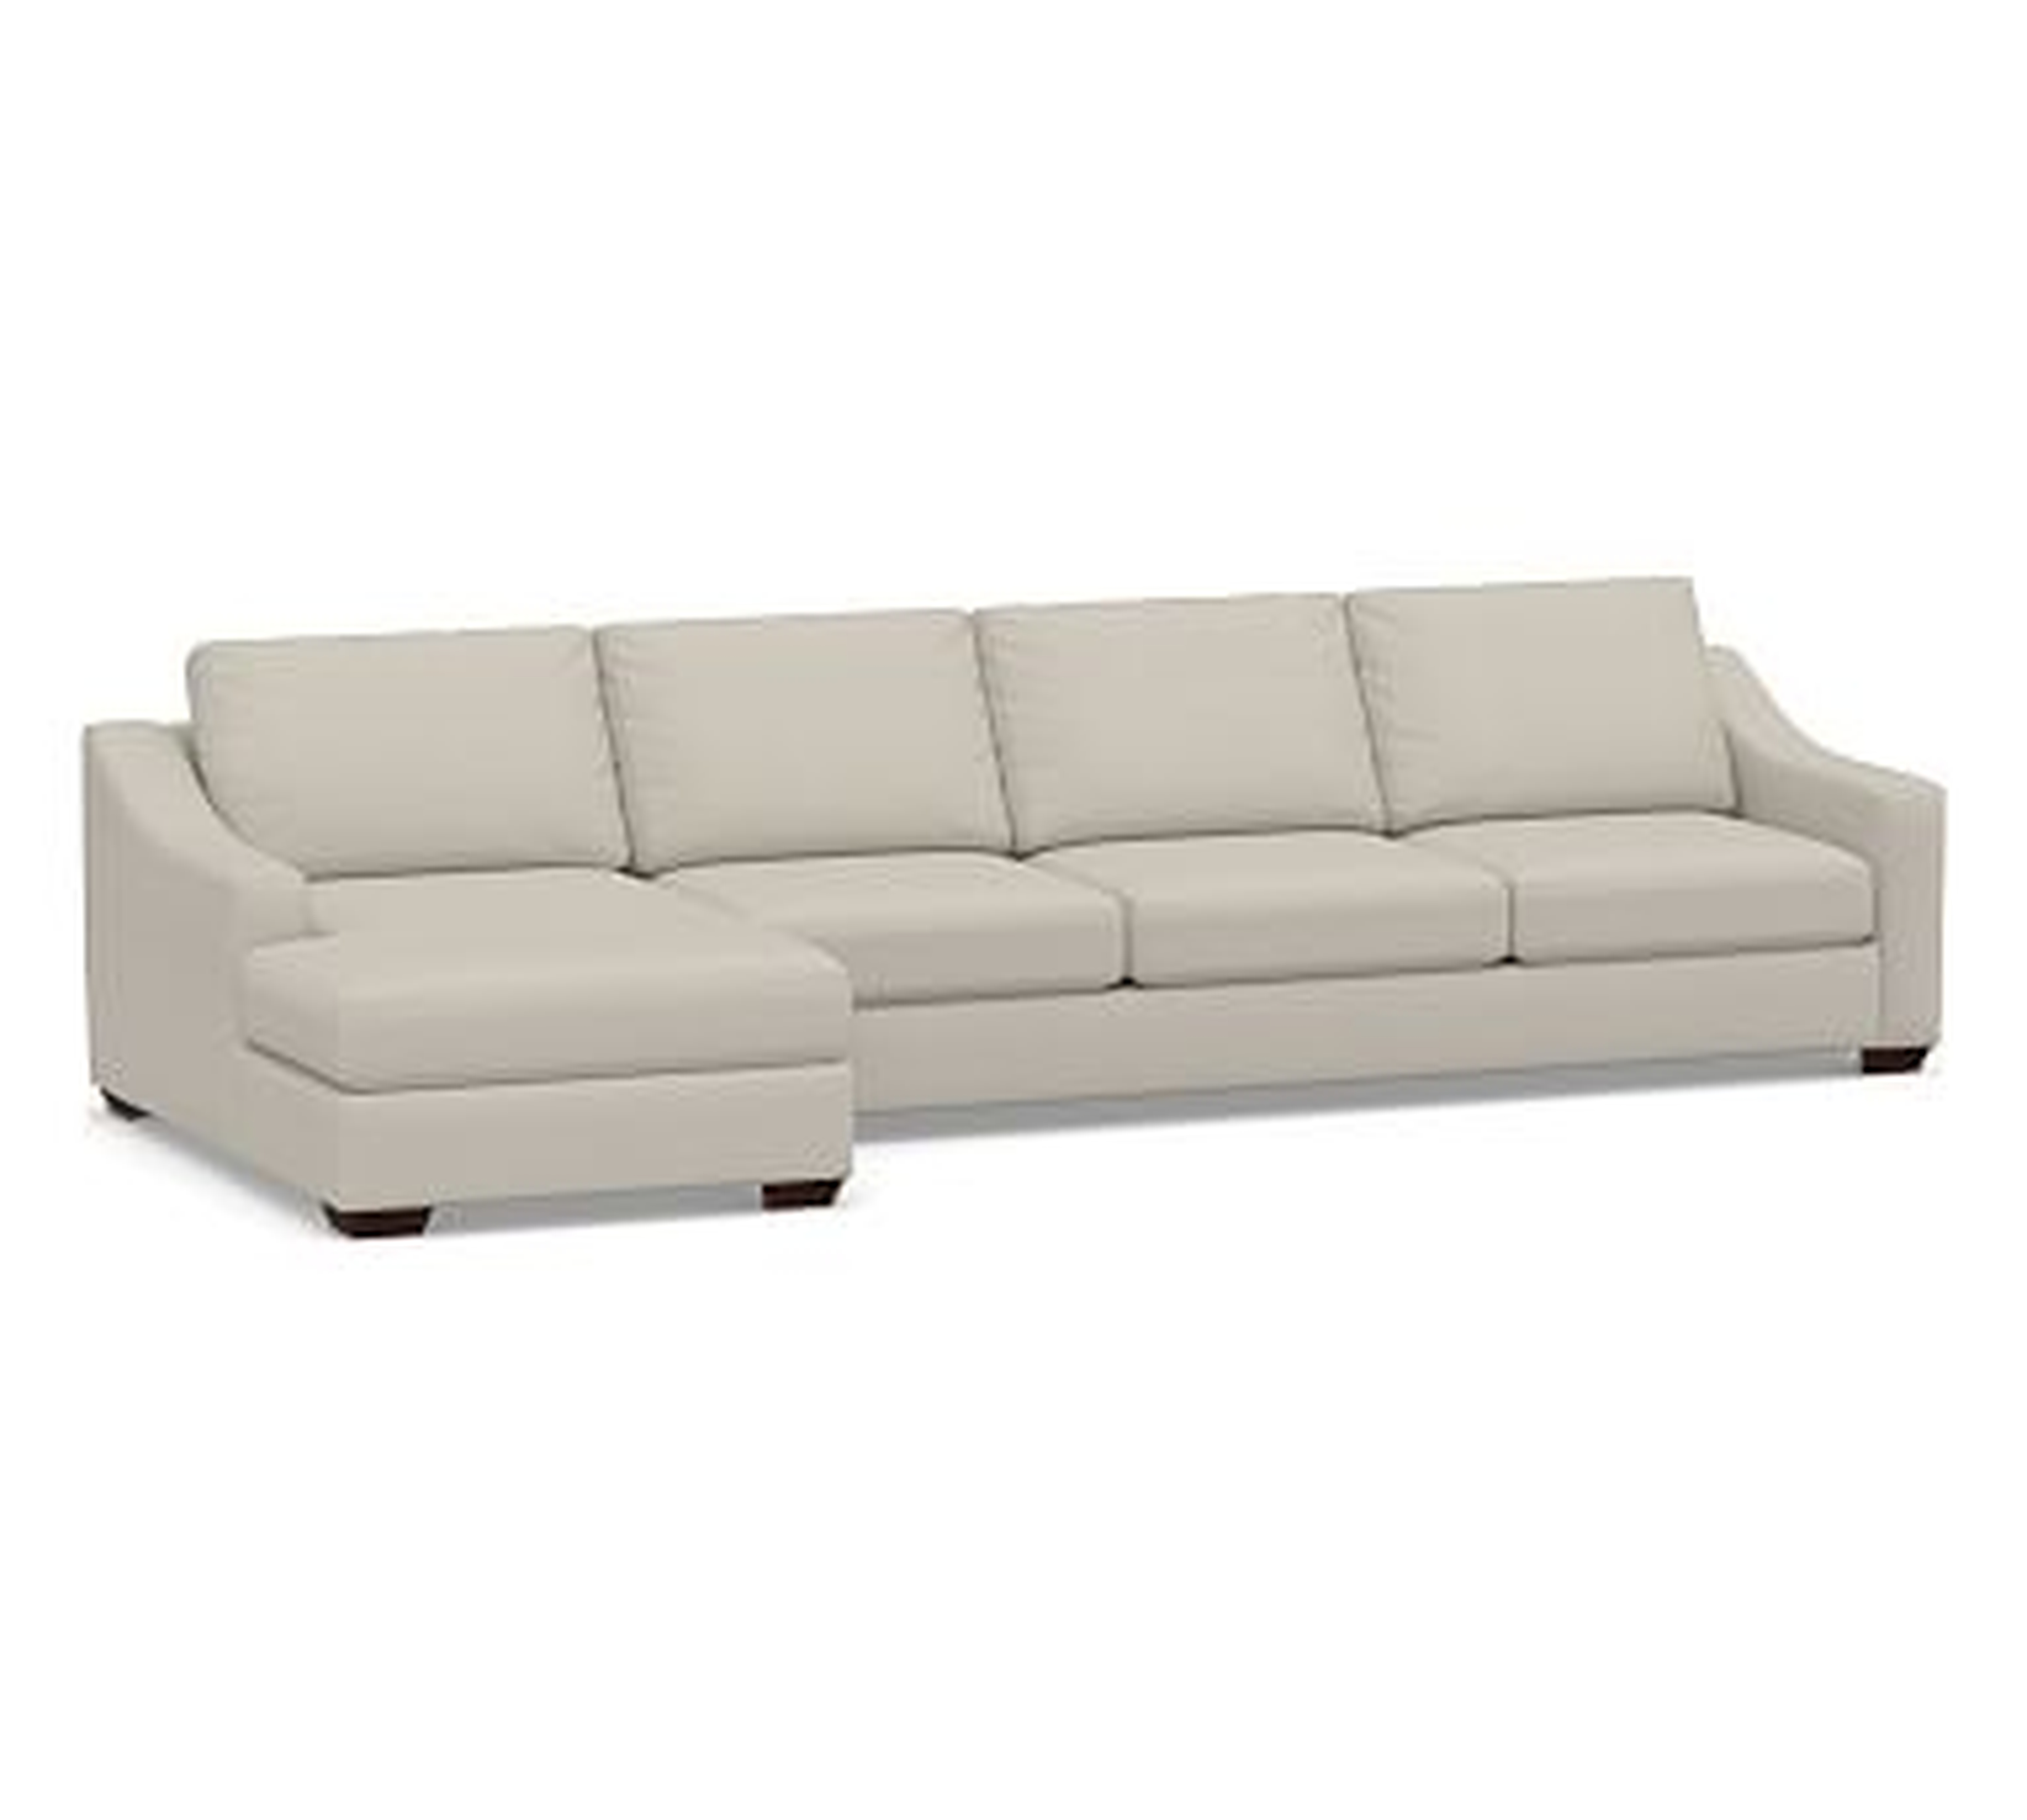 Big Sur Slope Arm Upholstered Right Arm Grand Sofa with Chaise Sectional, Down Blend Wrapped Cushions, Performance Heathered Tweed Pebble - Pottery Barn